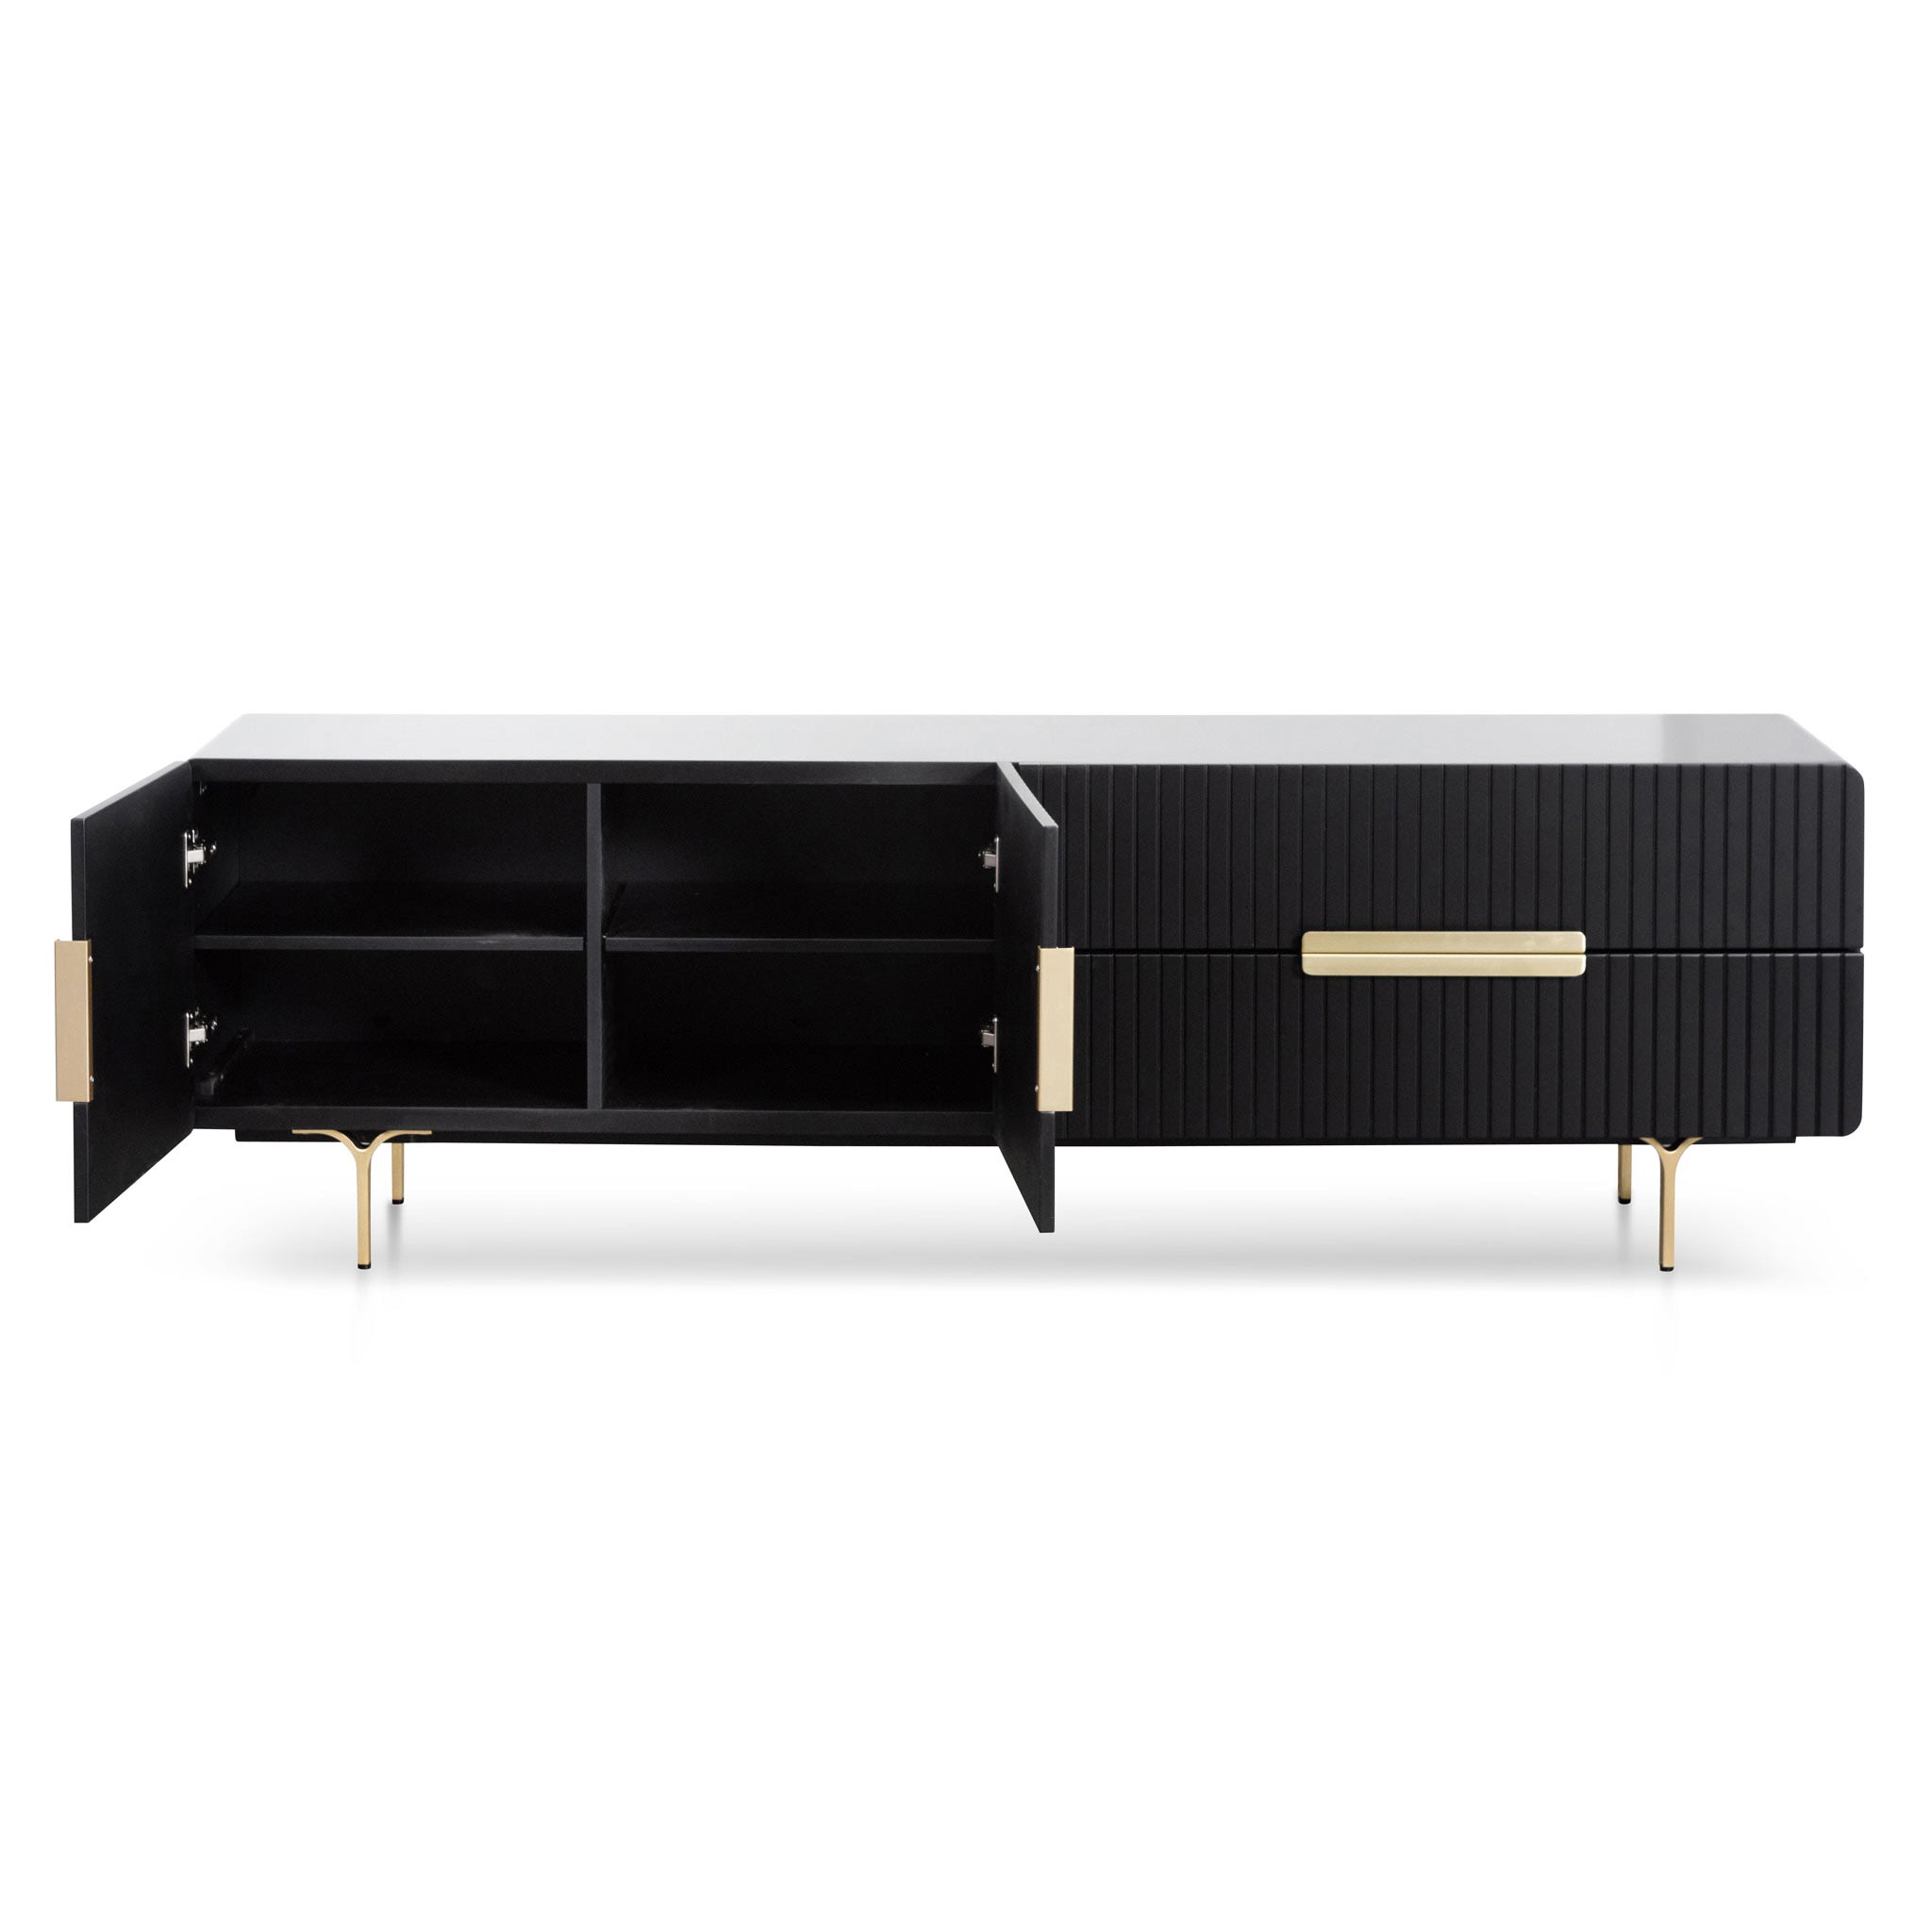 Kendrick Matte Black TV Stand - Brass Legs and Handle - TV Units